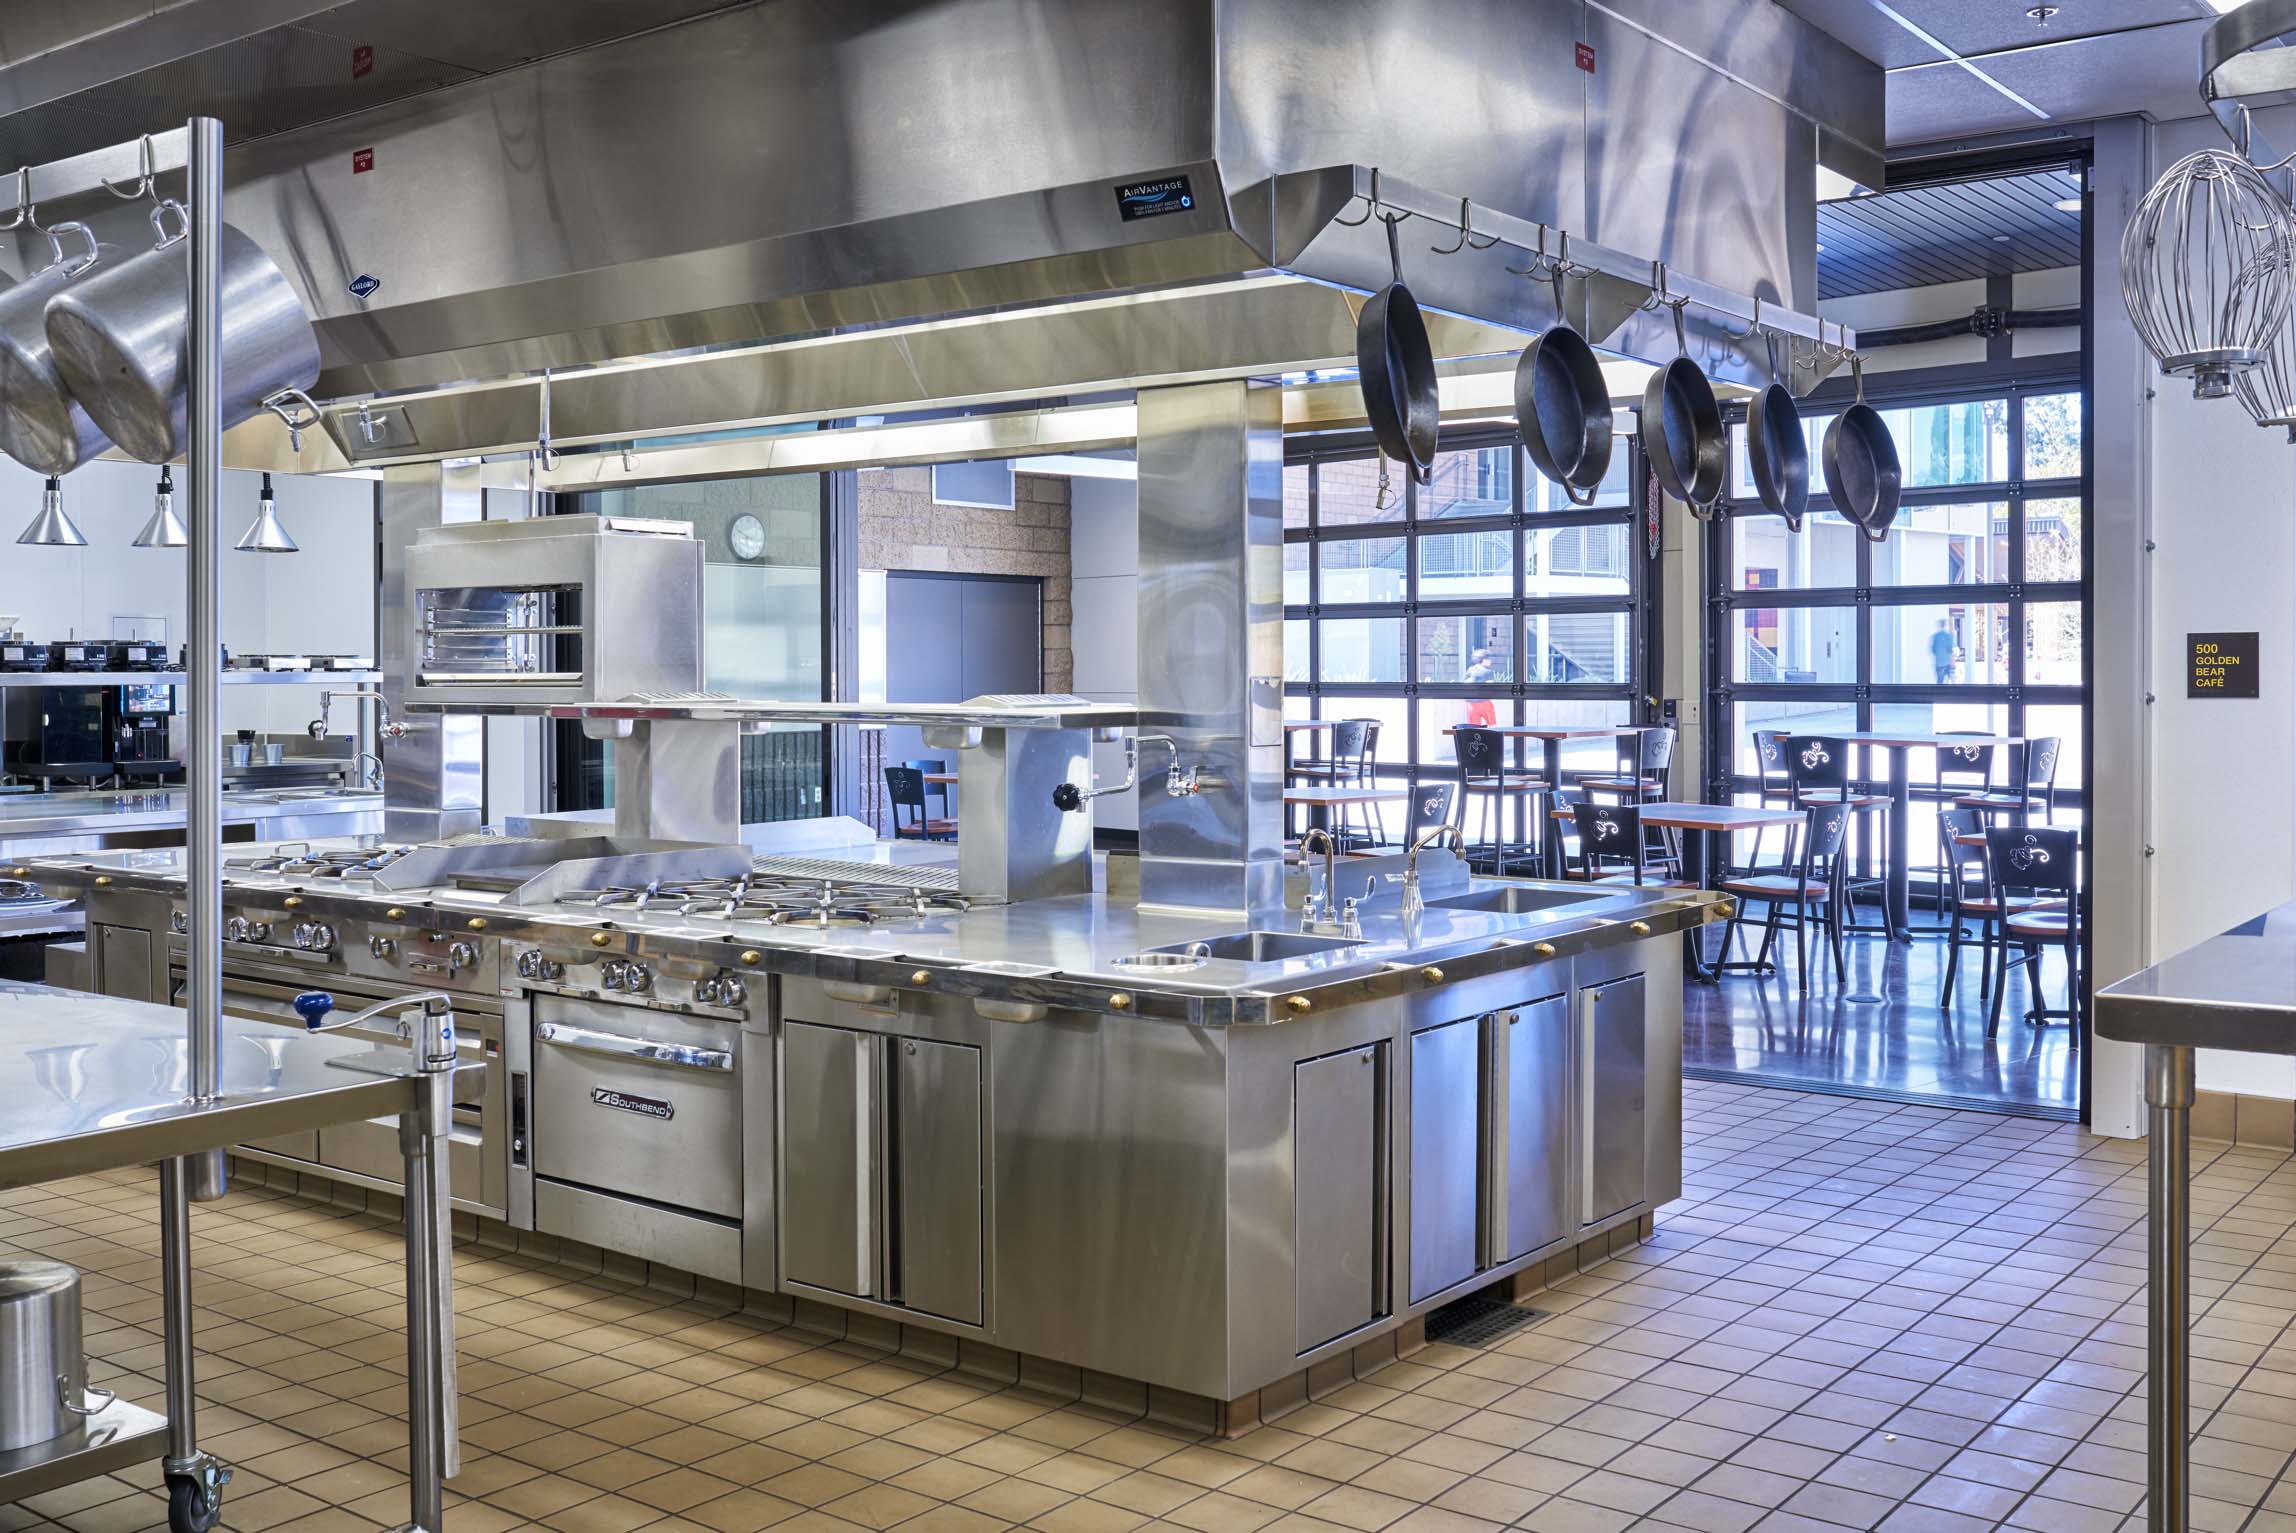 Kitchen and cafeteria at Temecula Valley High School